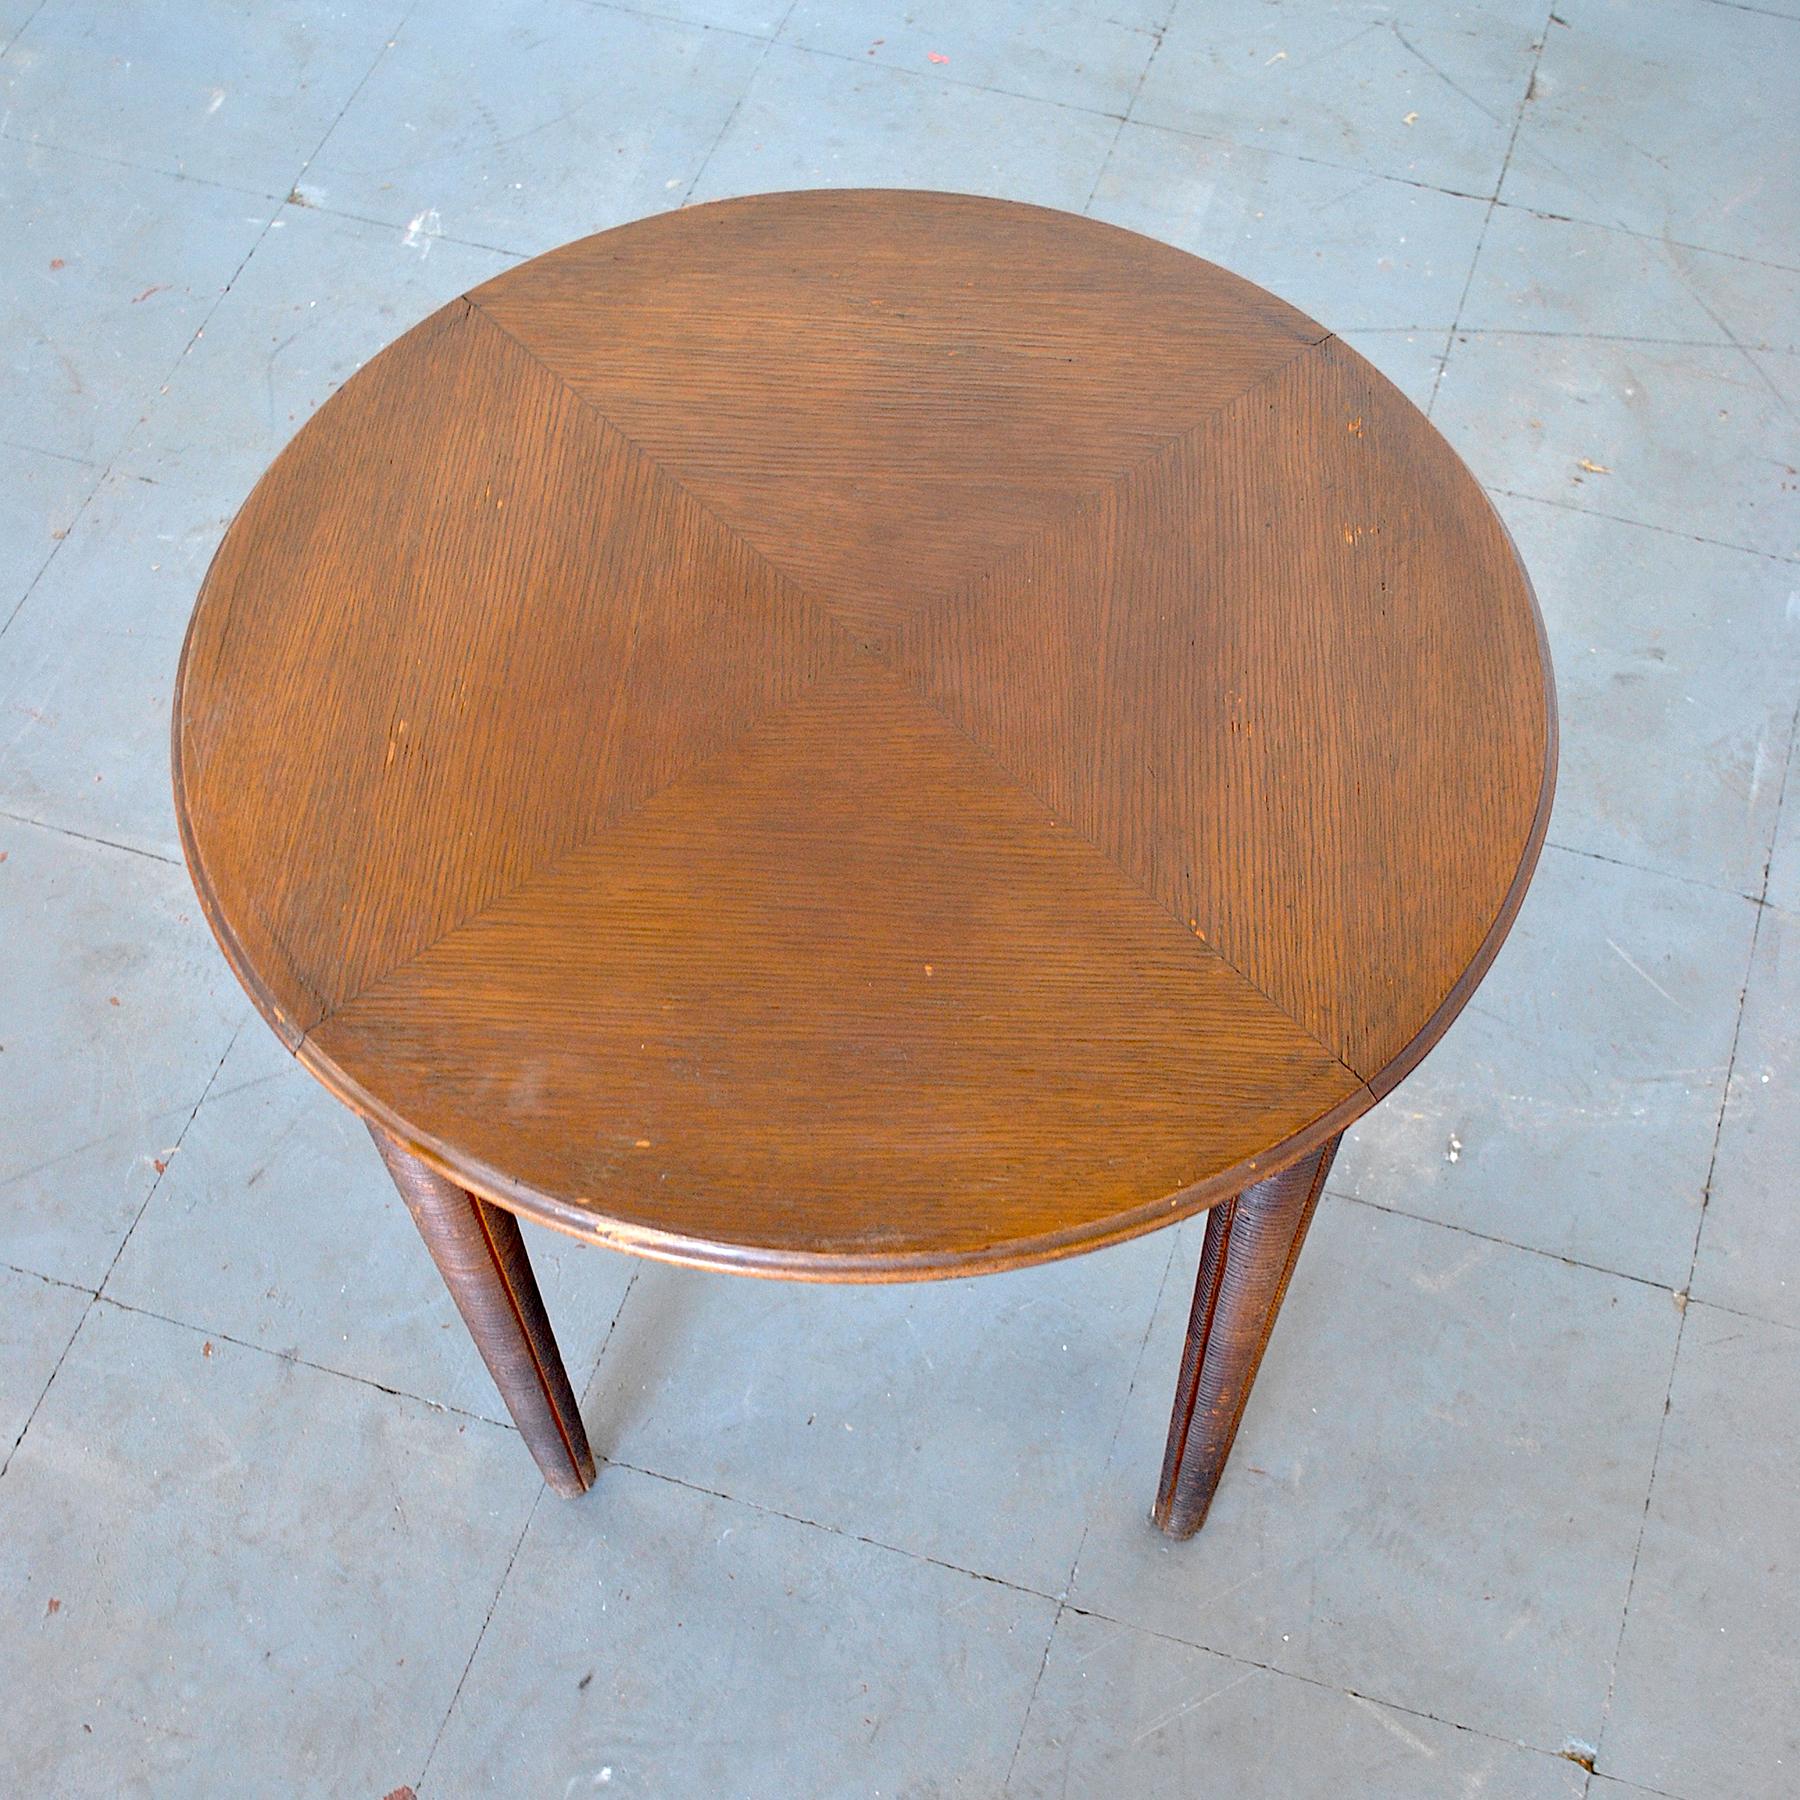 Circular coffee table form Milan school in Gio Ponti style with feet worked in an excellent way.